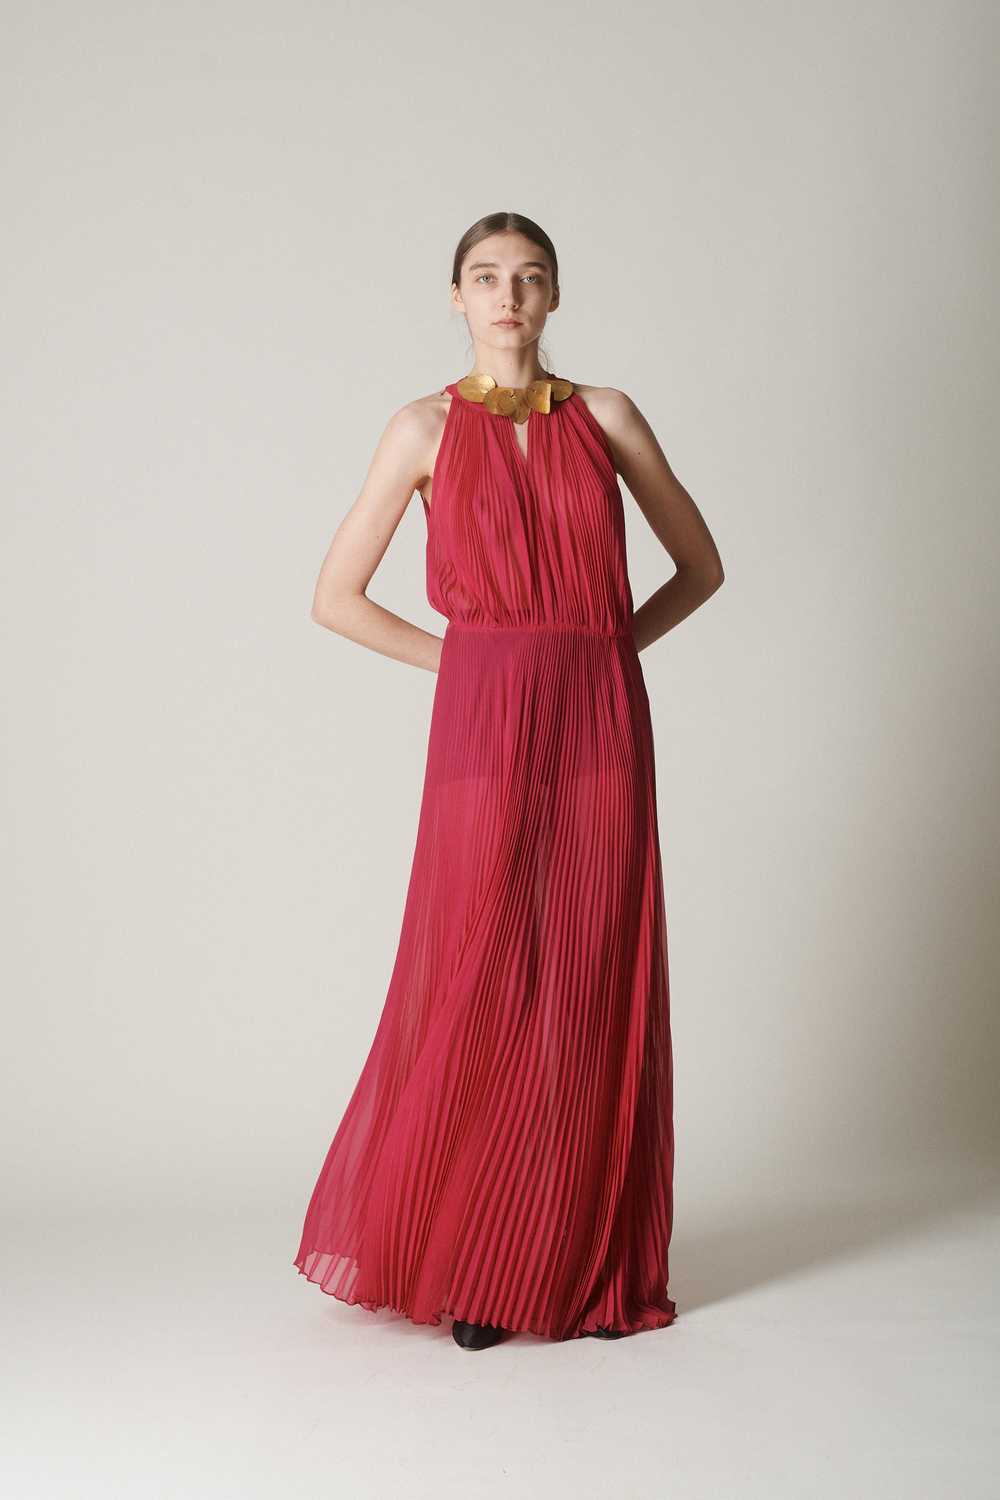 Vintage Pleated Chiffon Gown - image 1